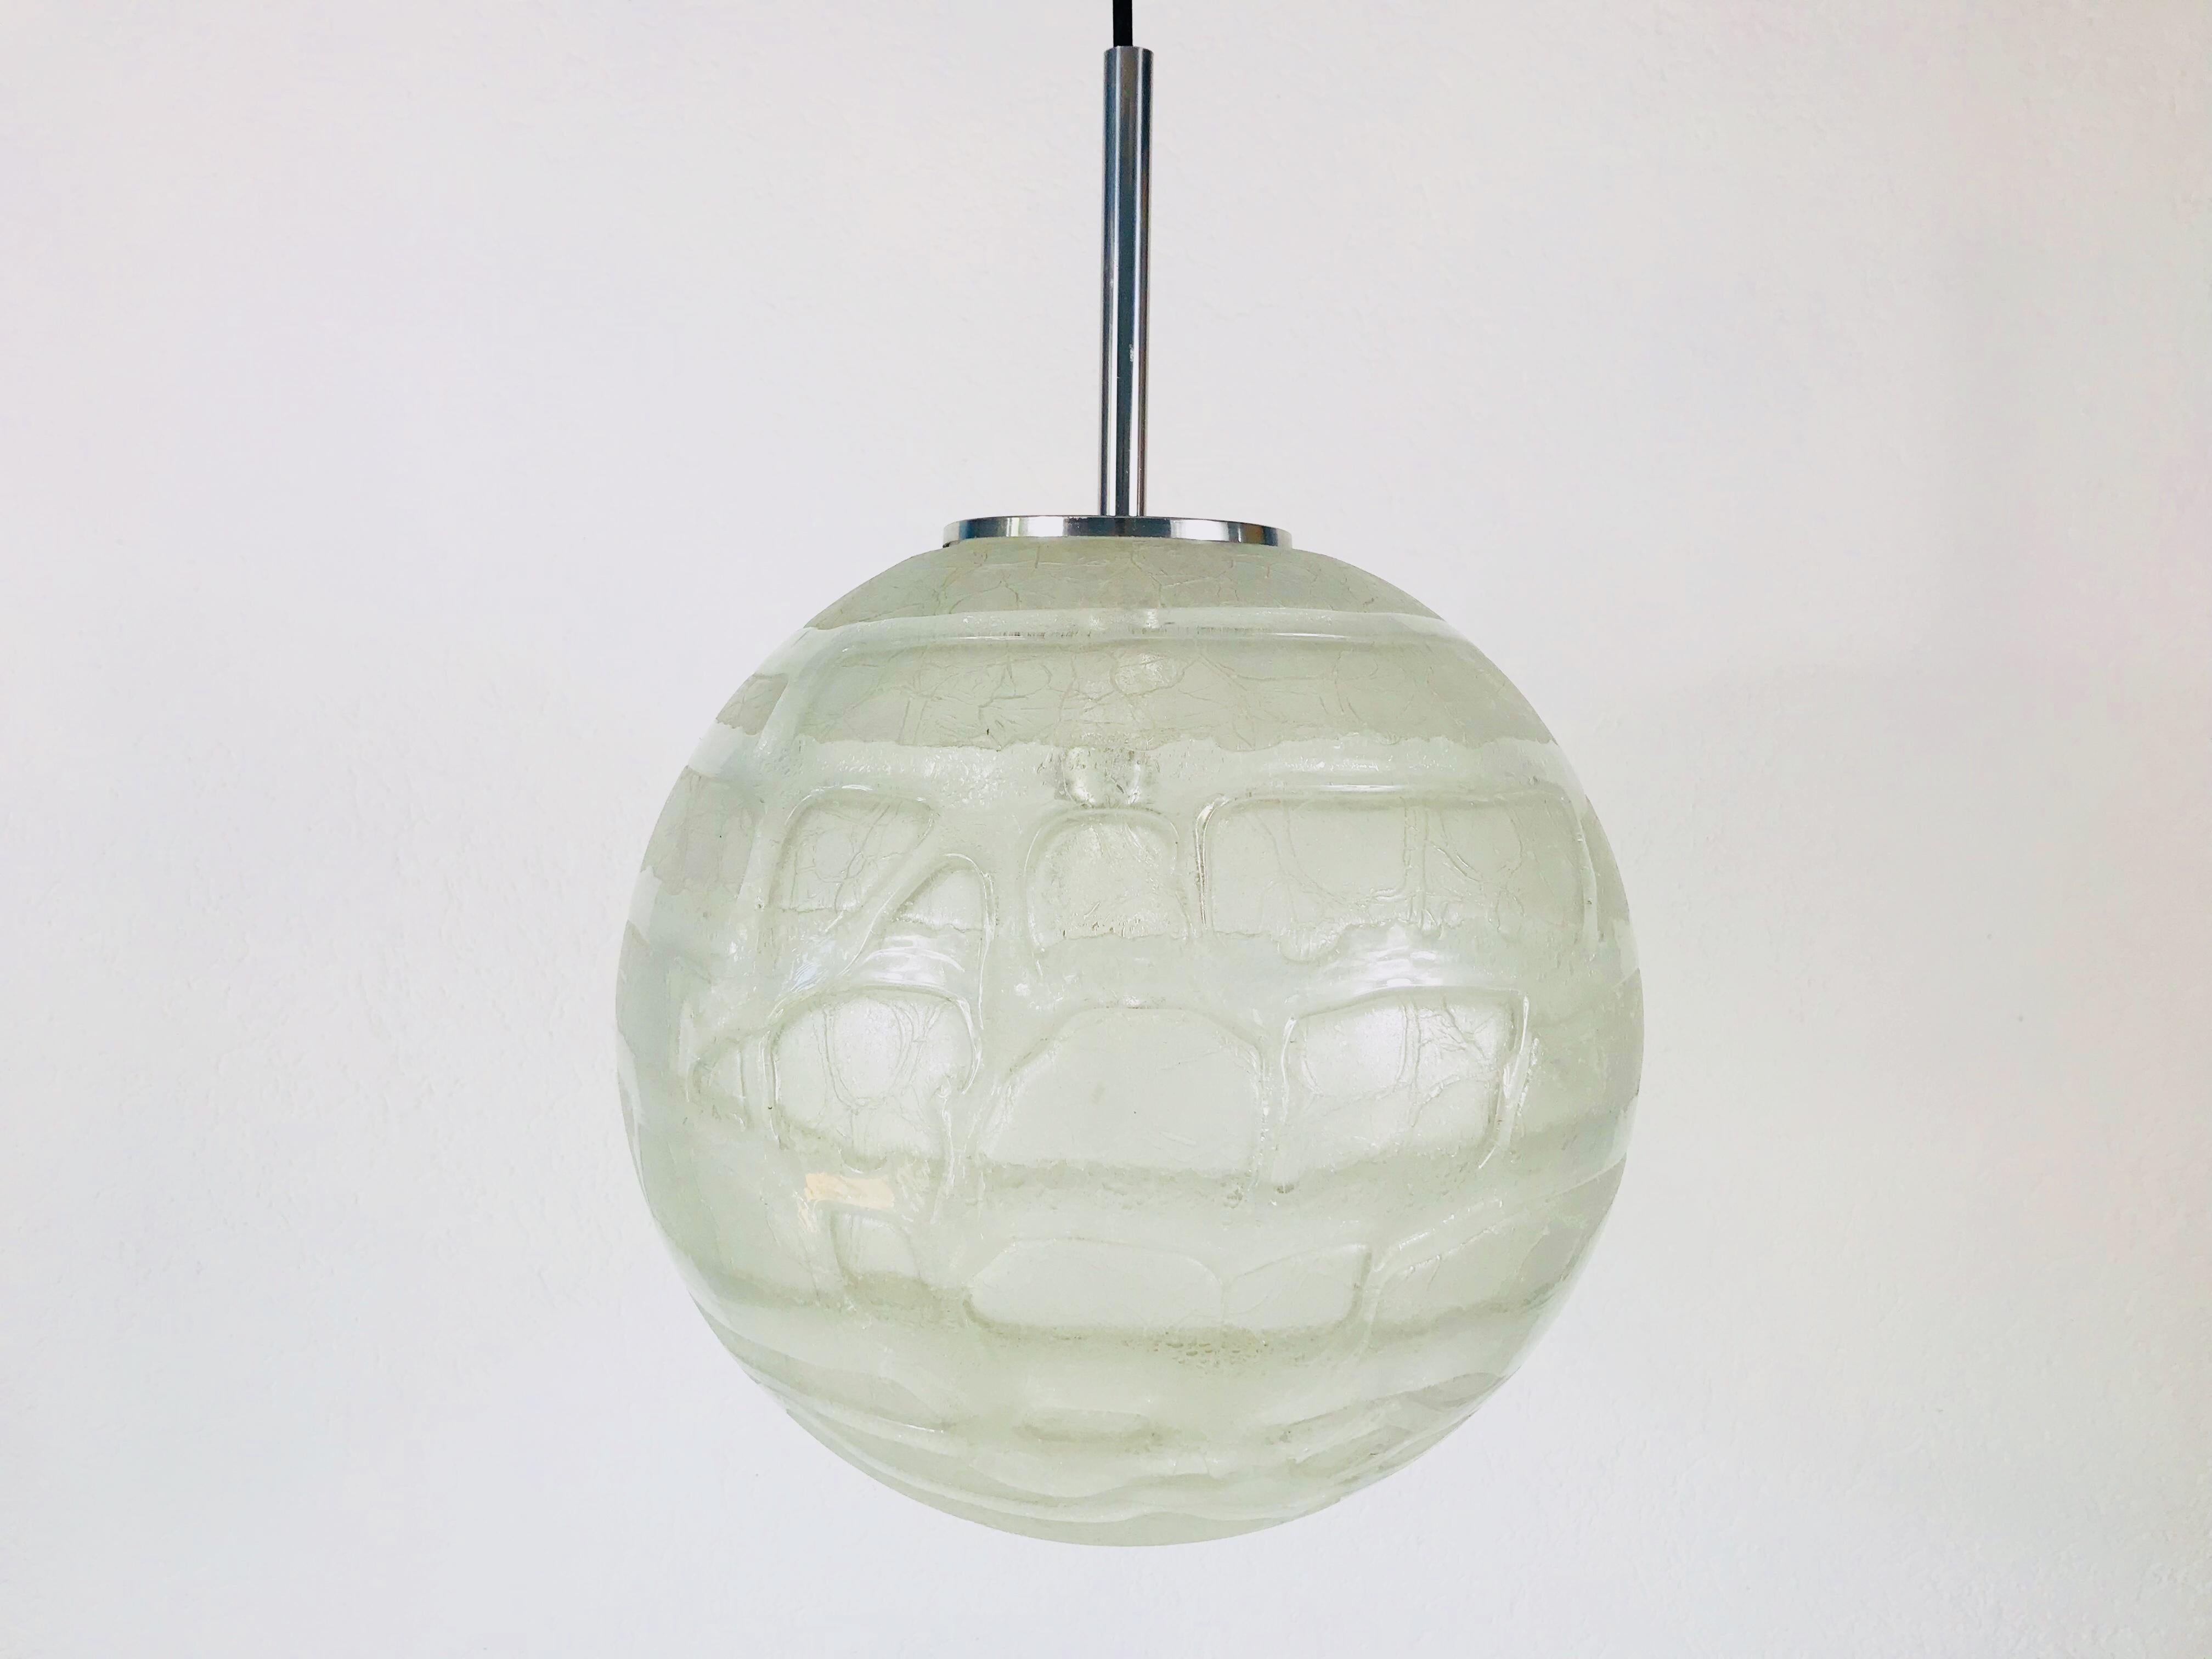 A beautiful glass bowl hanging lamp made in Germany in the 1970s. The light is made of Murano glass. It has an amazing transparent color and it is very solid. The top of the lamp is chrome aluminum.

The light requires one E27 light bulb.